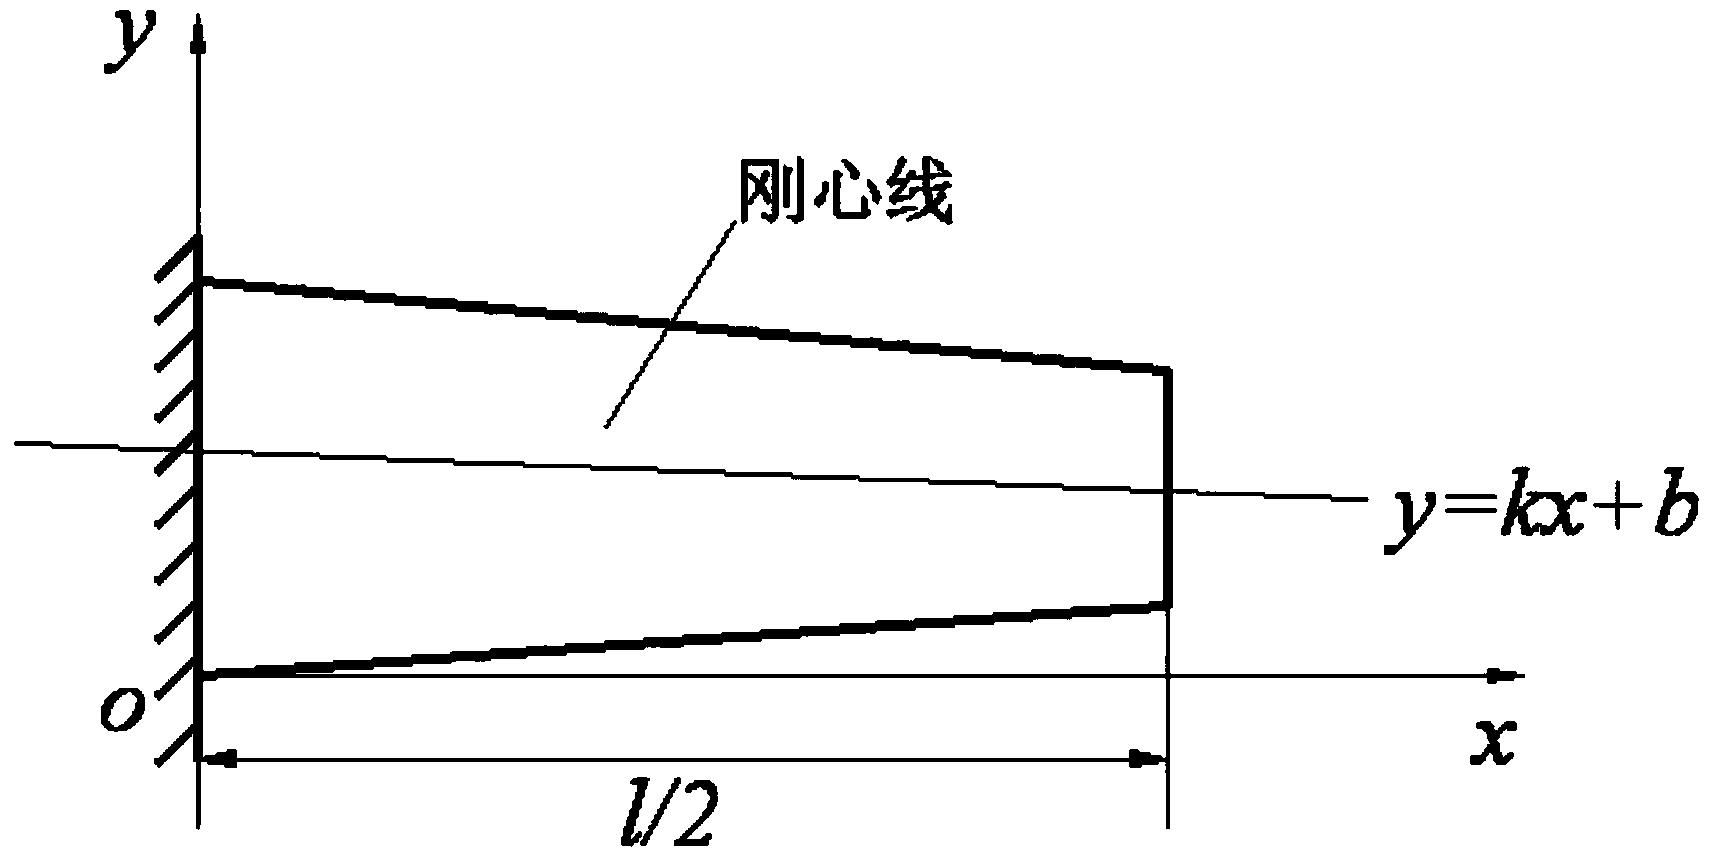 Method for determining positions of wing spars